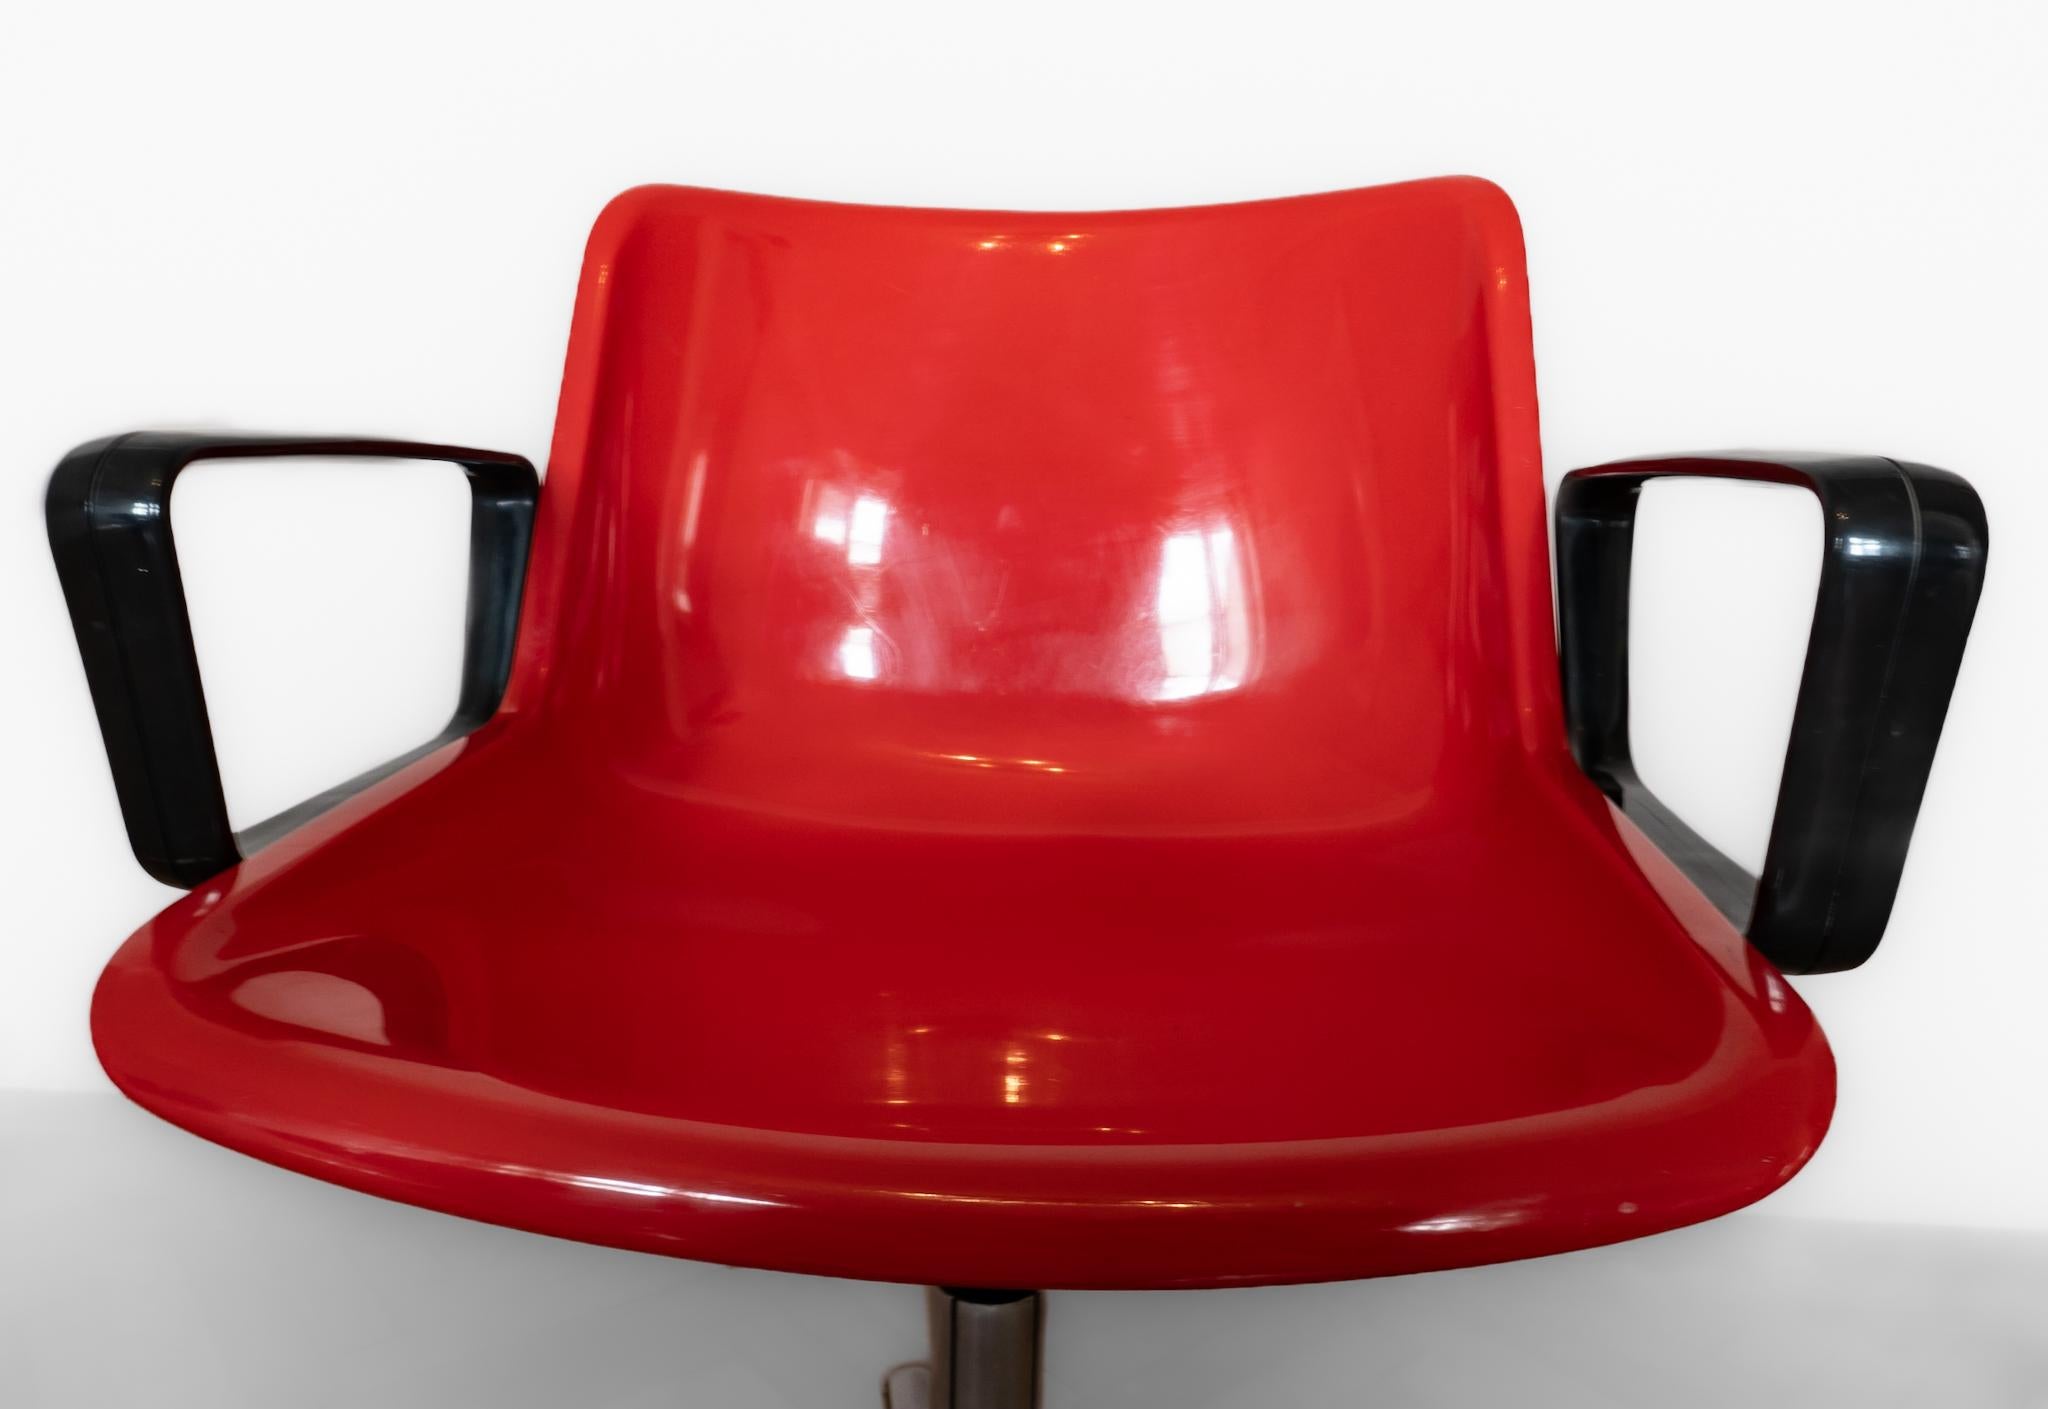 Mid-Century Modern Red Office Chair Modus 5 with Armrests by Osvaldo Borsani, Italy 1970s.

Elevate your office space with the timeless red Italian office chair “Modus” by renowned designer Osvaldo Borsani produced by Tecno in the 70s. This seating